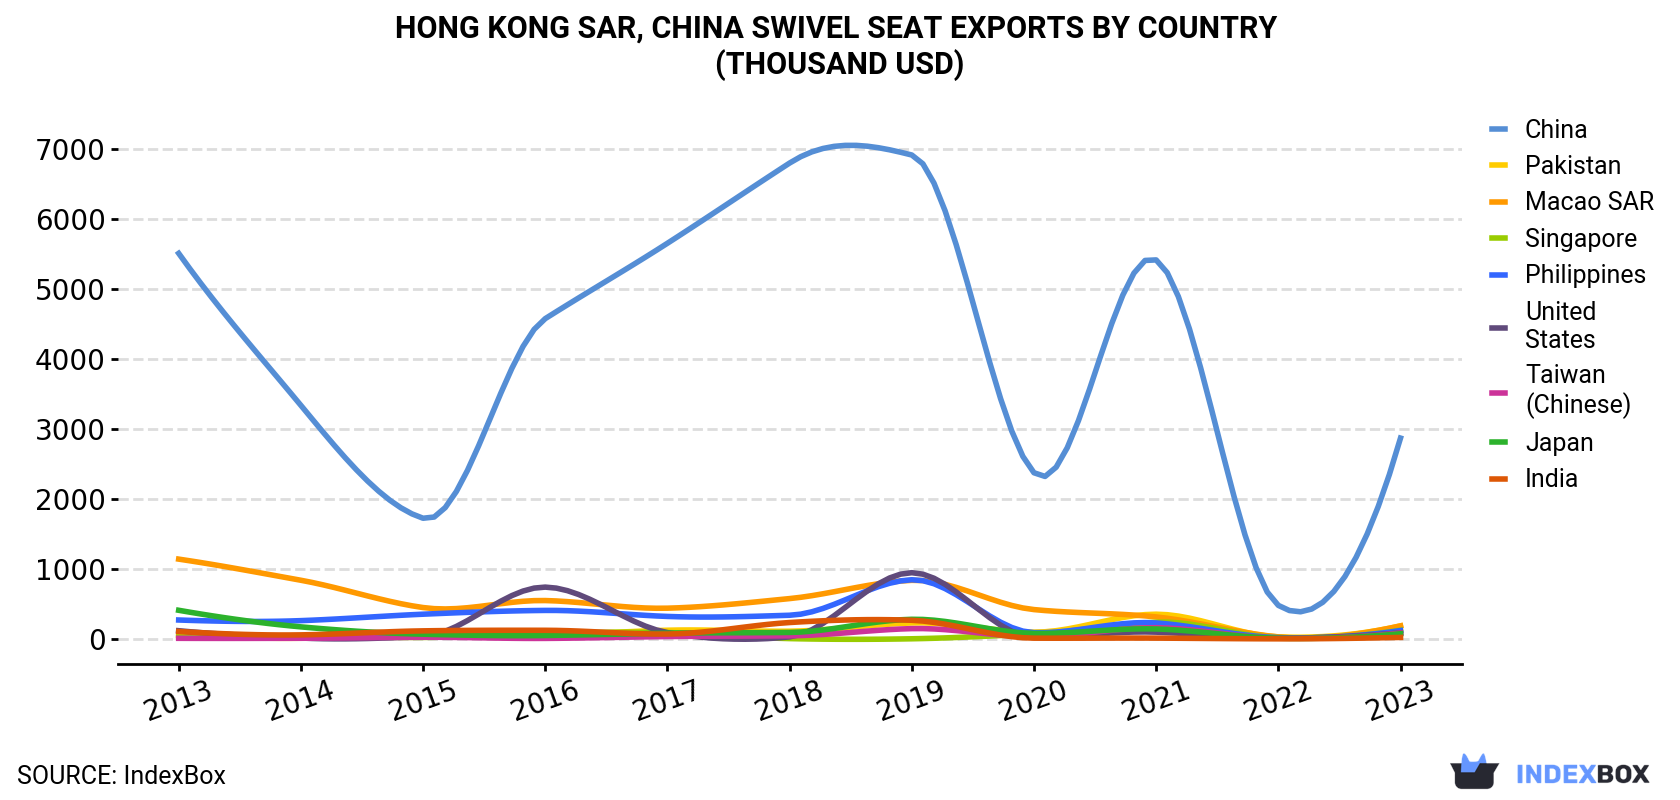 Hong Kong Swivel Seat Exports By Country (Thousand USD)